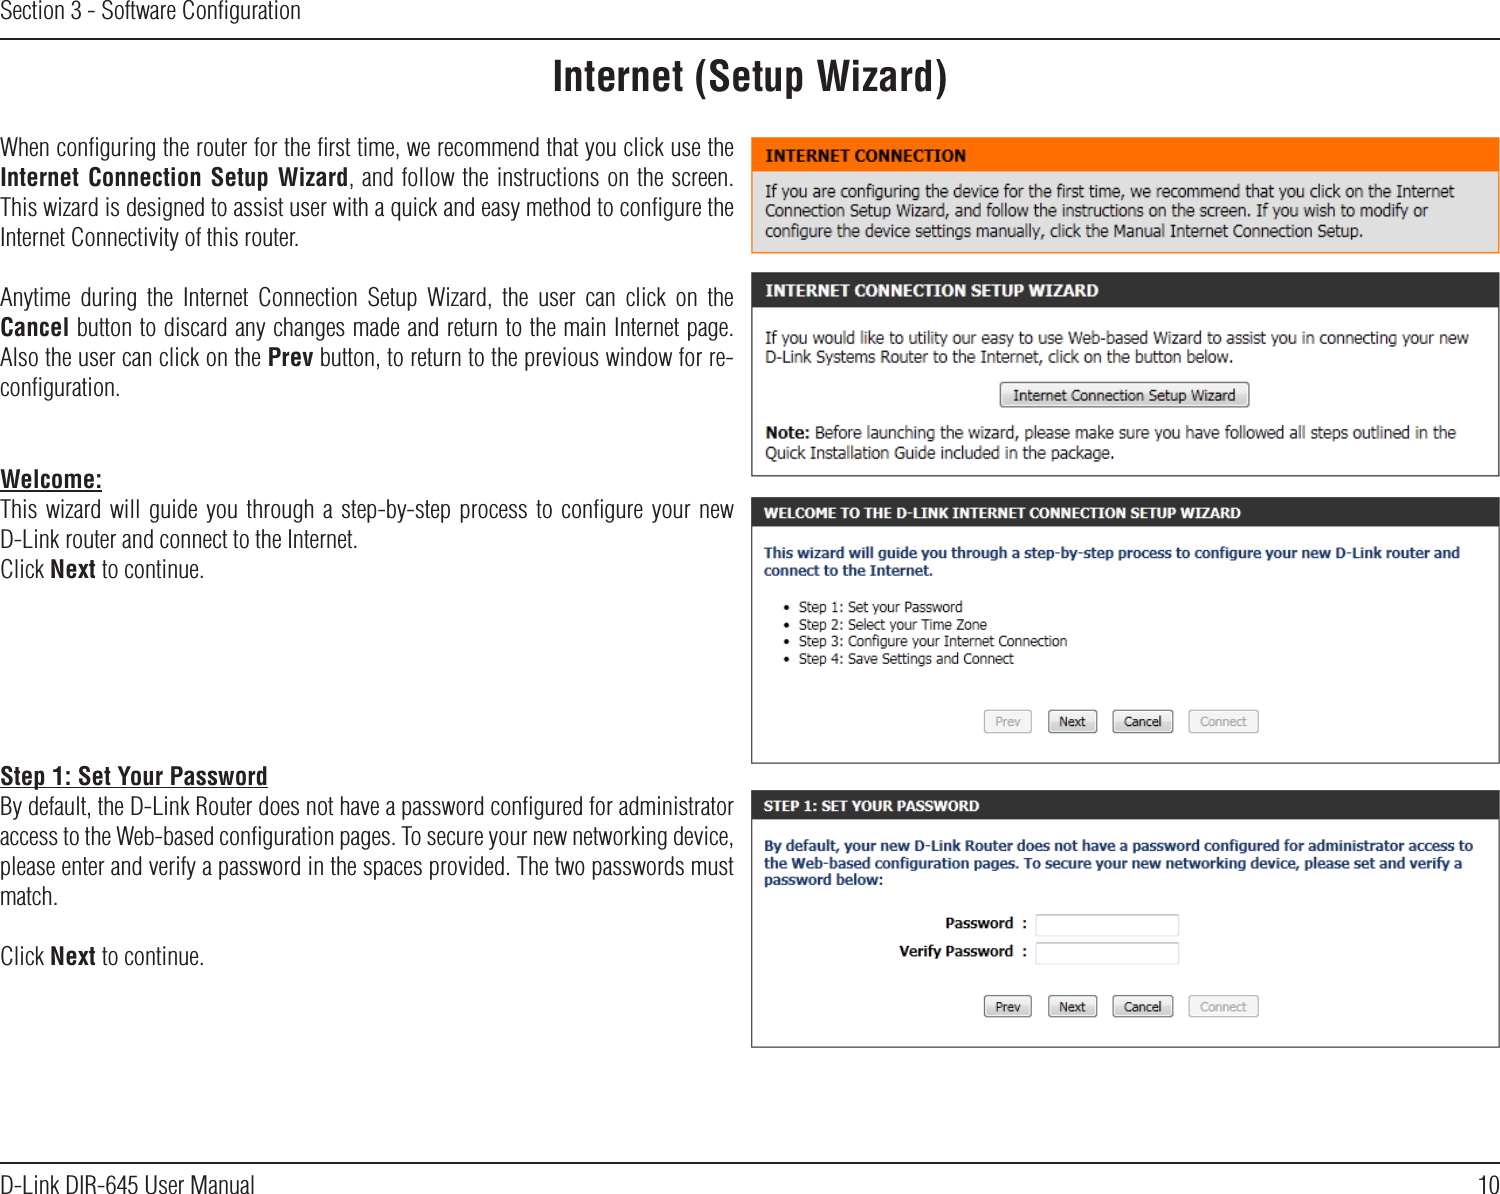 10D-Link DIR-645 User ManualSection 3 - Software ConﬁgurationInternet (Setup Wizard)When conﬁguring the router for the ﬁrst time, we recommend that you click use the Internet Connection  Setup Wizard, and follow the instructions on the screen. This wizard is designed to assist user with a quick and easy method to conﬁgure the Internet Connectivity of this router.Anytime  during  the  Internet  Connection  Setup  Wizard,  the  user  can  click  on  the Cancel button to discard any changes made and return to the main Internet page. Also the user can click on the Prev button, to return to the previous window for re-conﬁguration.Welcome:This wizard  will  guide  you  through  a step-by-step process  to  conﬁgure  your  new D-Link router and connect to the Internet. Click Next to continue.Step 1: Set Your PasswordBy default, the D-Link Router does not have a password conﬁgured for administrator access to the Web-based conﬁguration pages. To secure your new networking device, please enter and verify a password in the spaces provided. The two passwords must match.Click Next to continue.